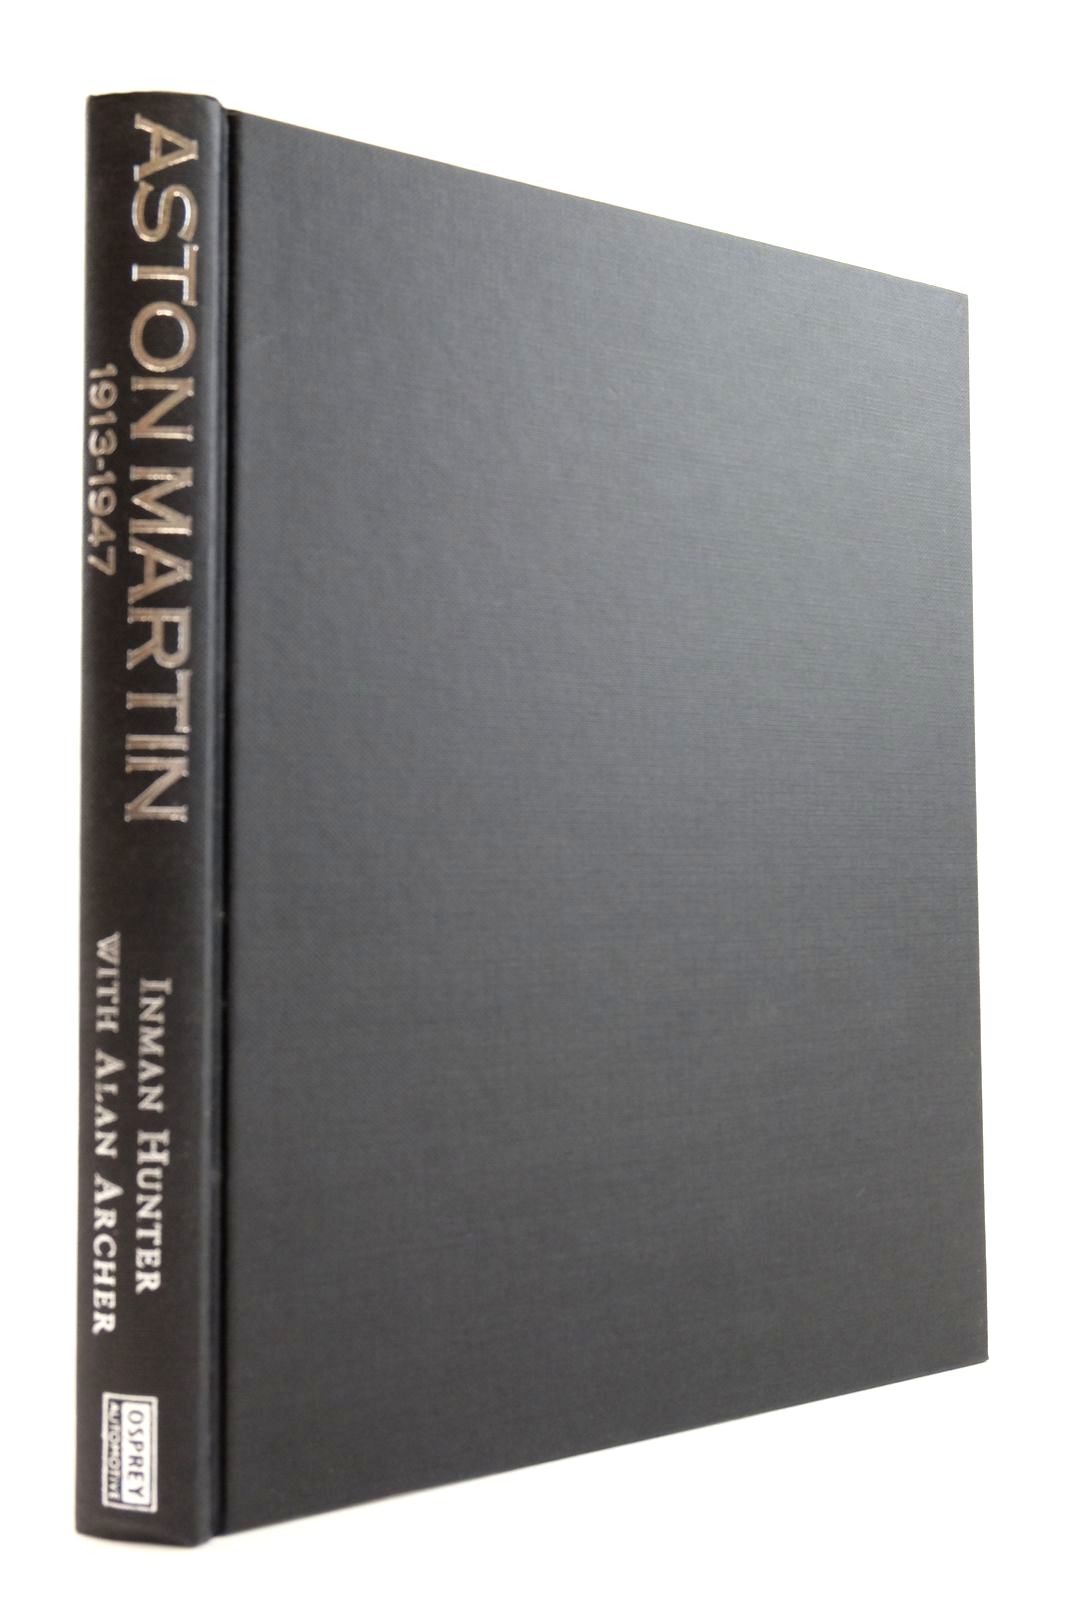 Photo of ASTON MARTIN 1913-1947 written by Hunter, Inman
Archer, Alan published by Osprey Automotive (STOCK CODE: 2132823)  for sale by Stella & Rose's Books